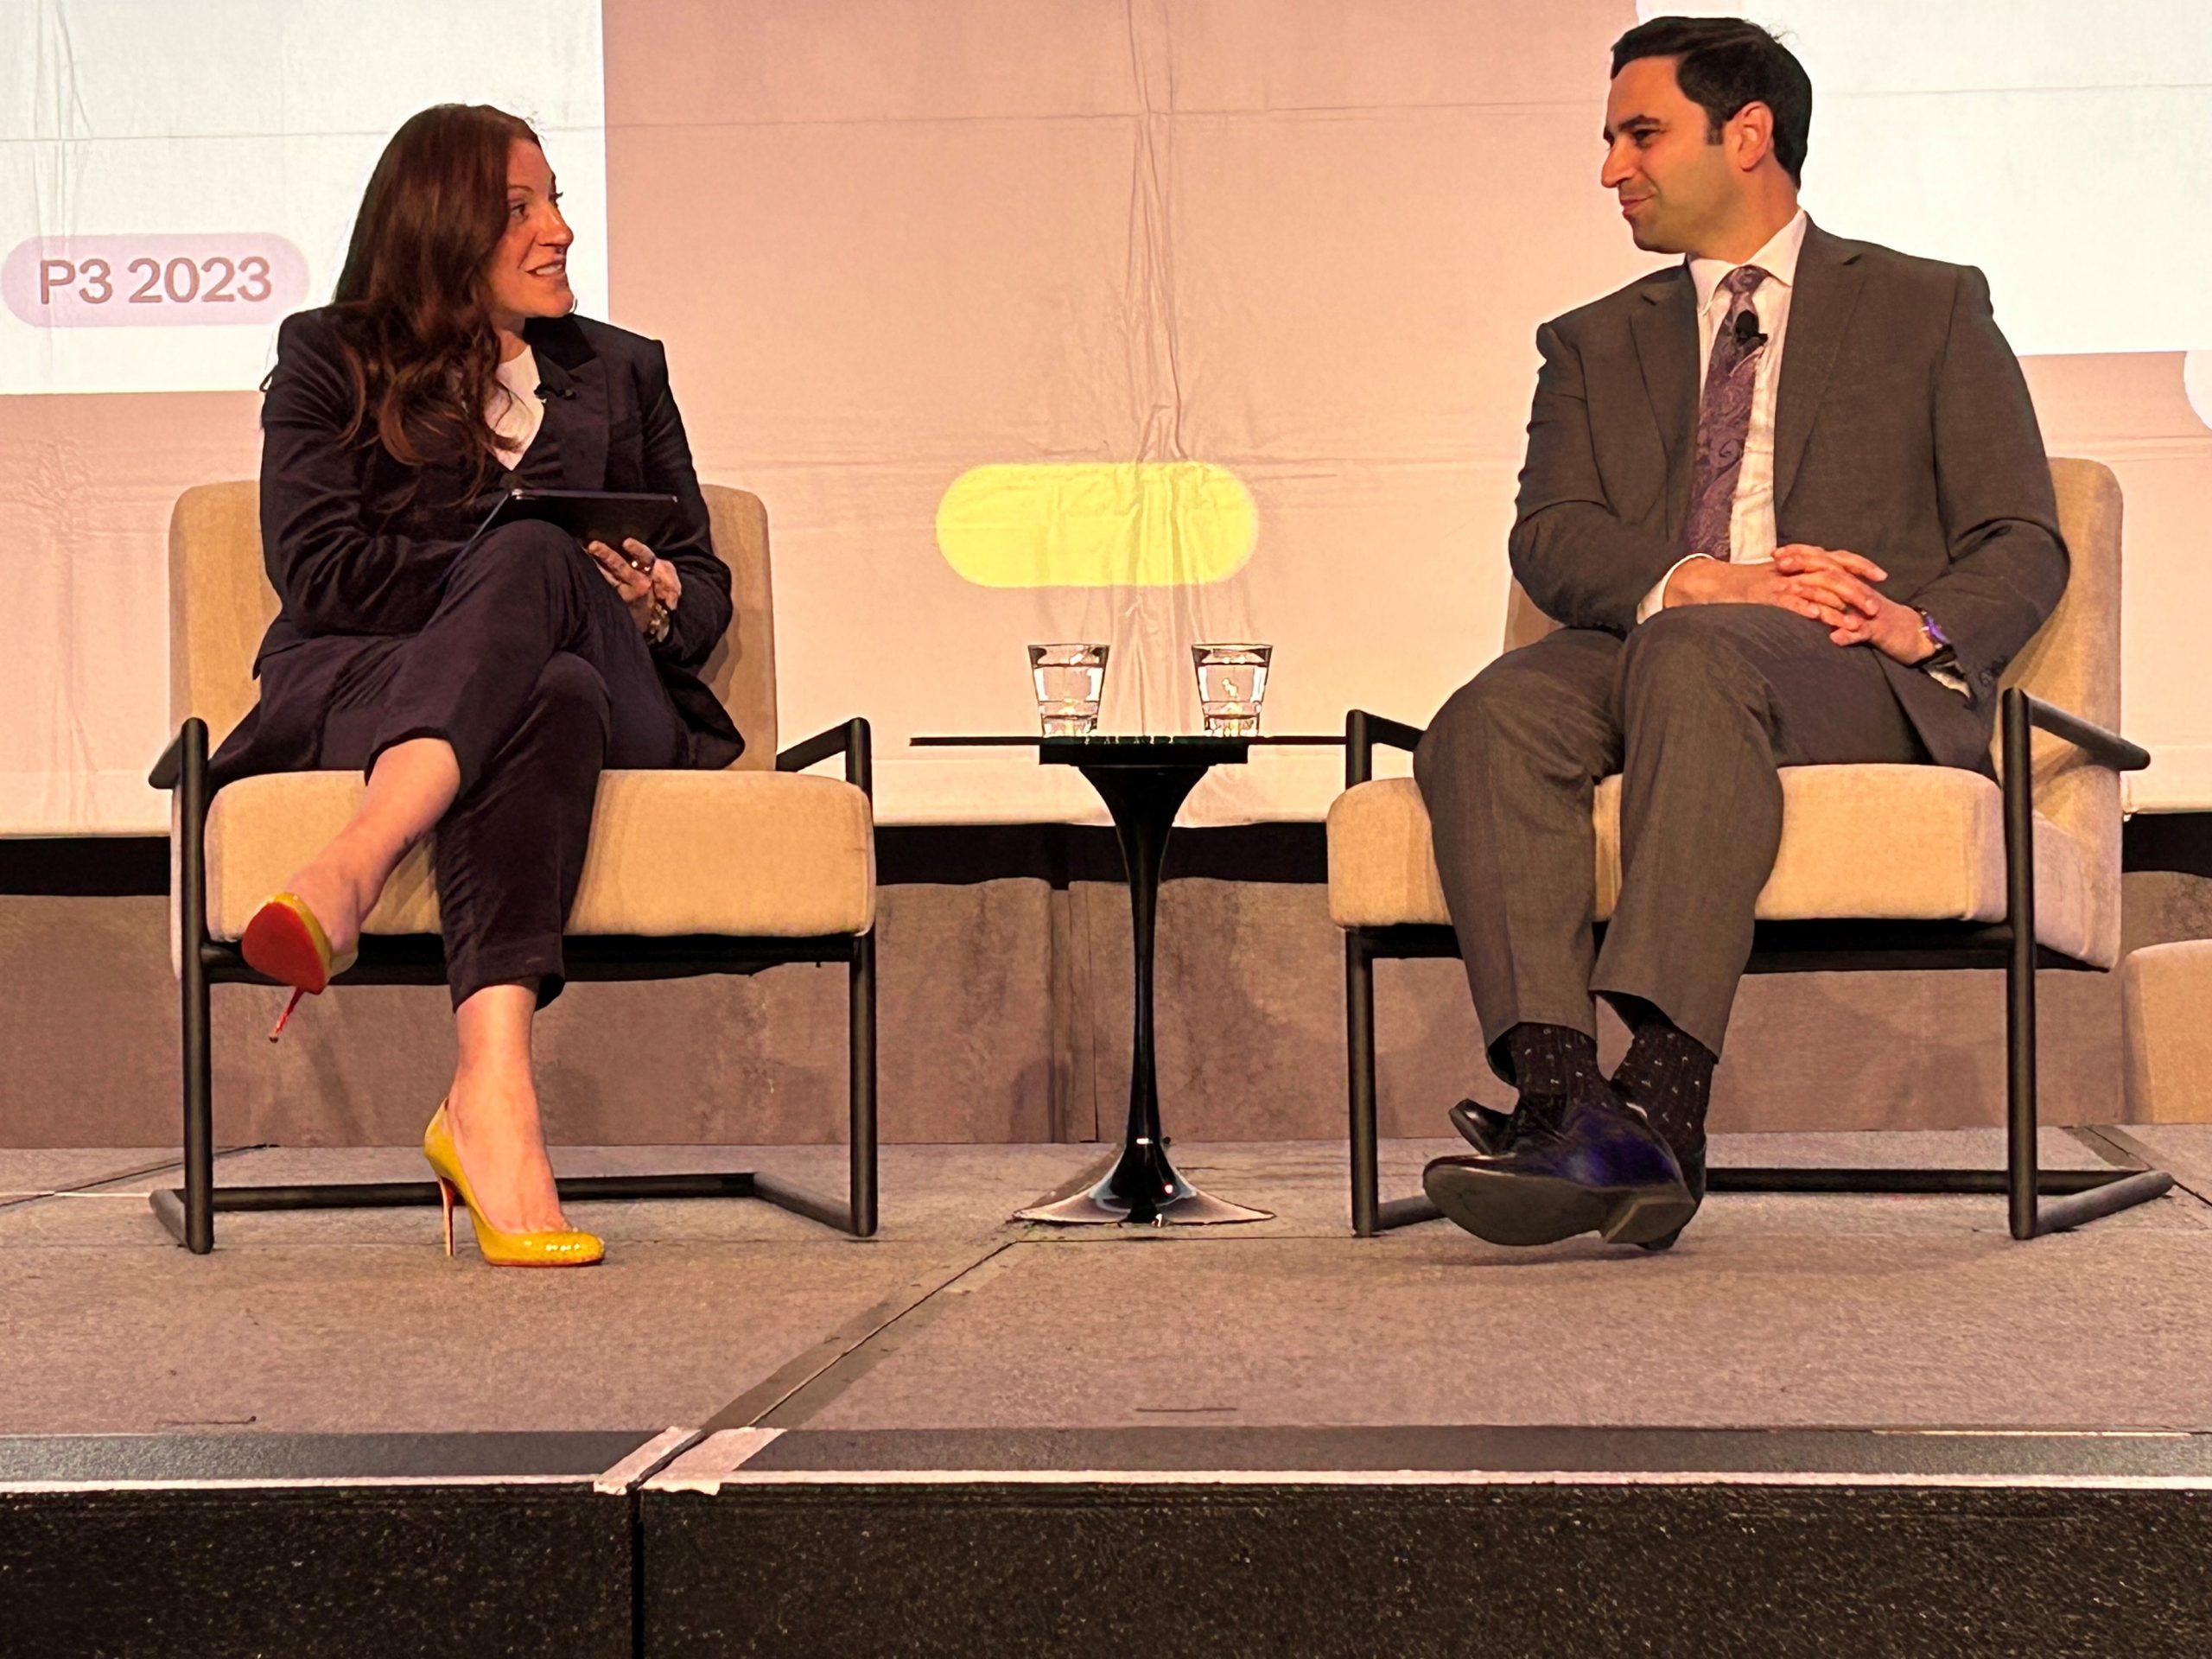 At the P3 2023 conference in Toronto in November, hosted by the Canadian Council for Public-Private Partnerships, the council’s president and CEO Lisa Mitchell sat down for a fireside chat with Peter Fragiskatos, parliamentary secretary to the minister of housing, infrastructure and communities.